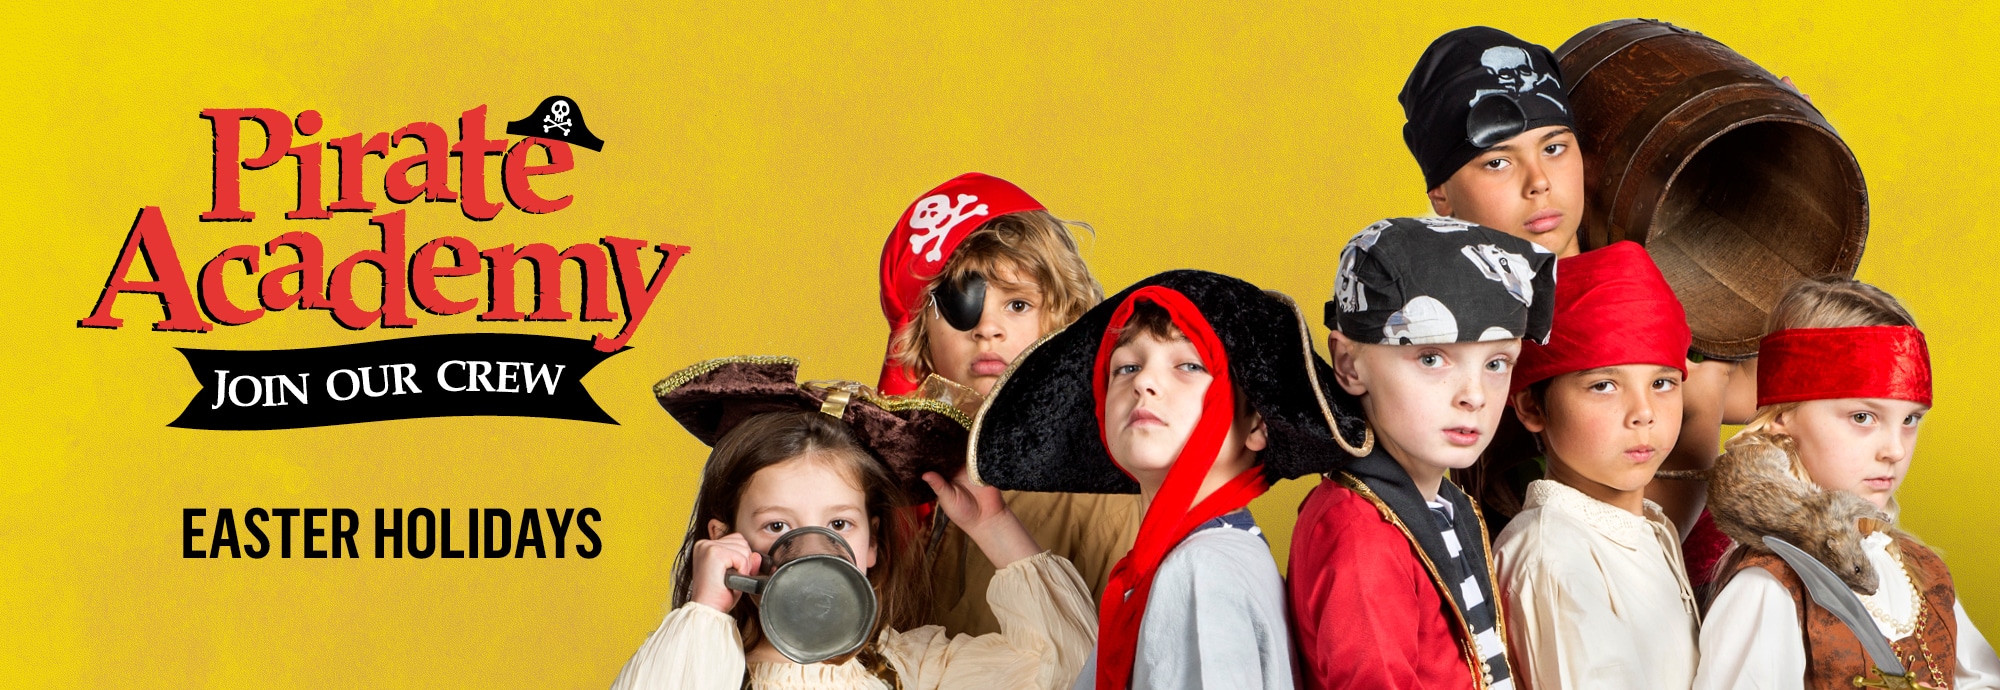 The left side of the image features text that reads 'Pirate Academy', 'join our crew' and 'Easter holidays'. On the right, seven children are dressed in pirate costumes.